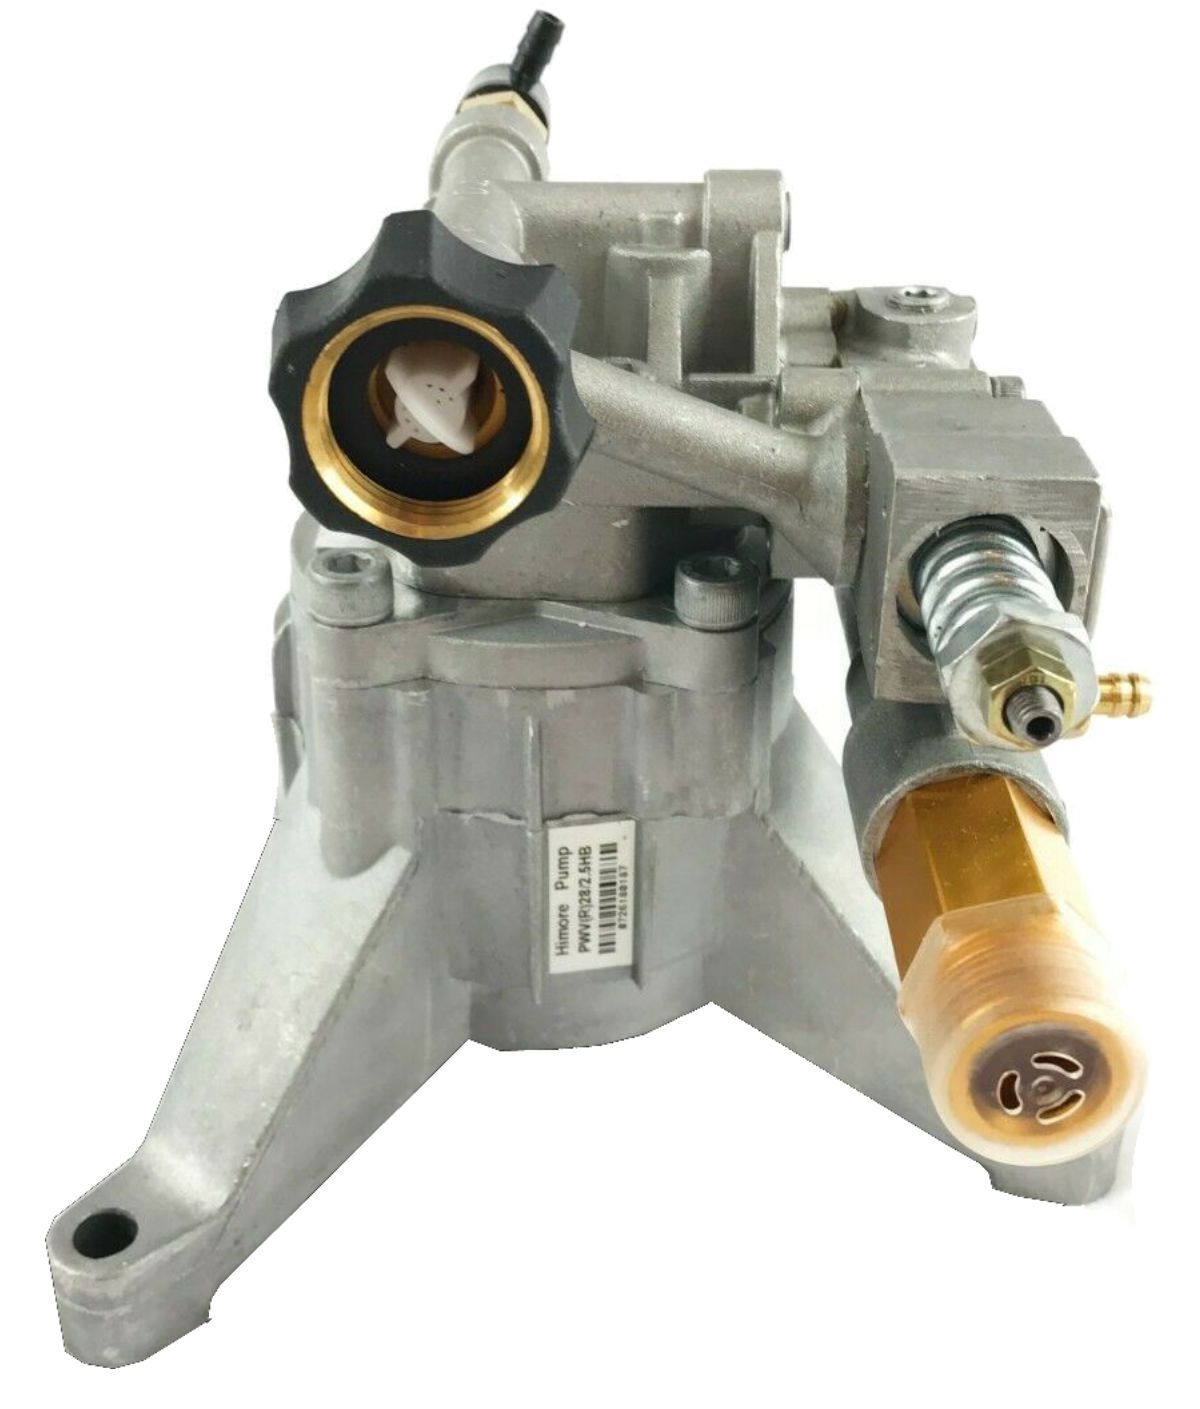 2700 PSI PRESSURE WASHER WATER PUMP Campbell Hausfeld PW205402LE - AE-Power